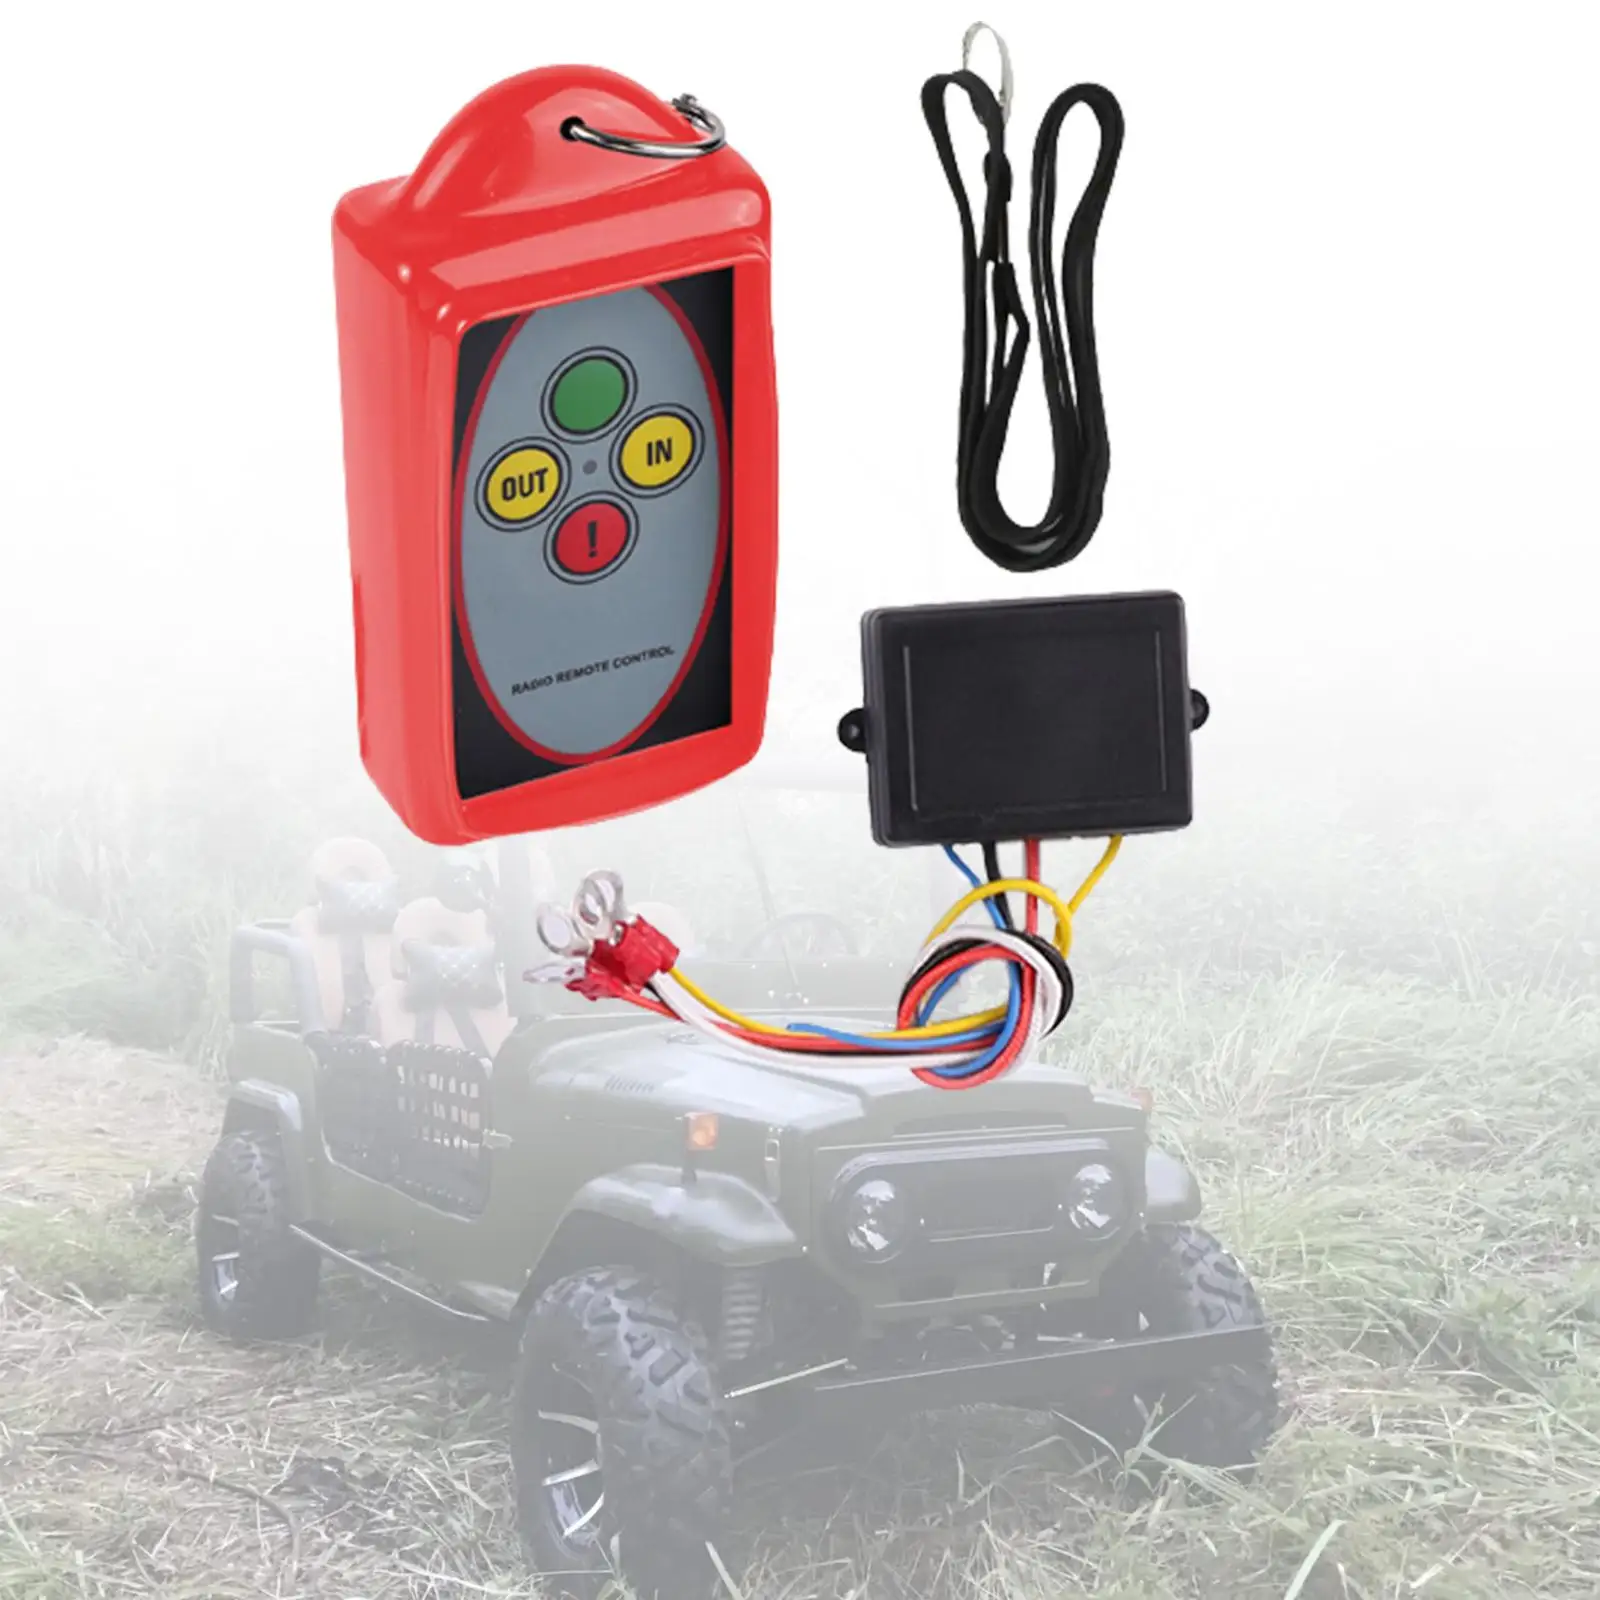 Winch Wireless Remote Control Switch Kit Waterproof Premium 12V 24V 433MHz Remote Receiver Kit Replacement Vehicle Car